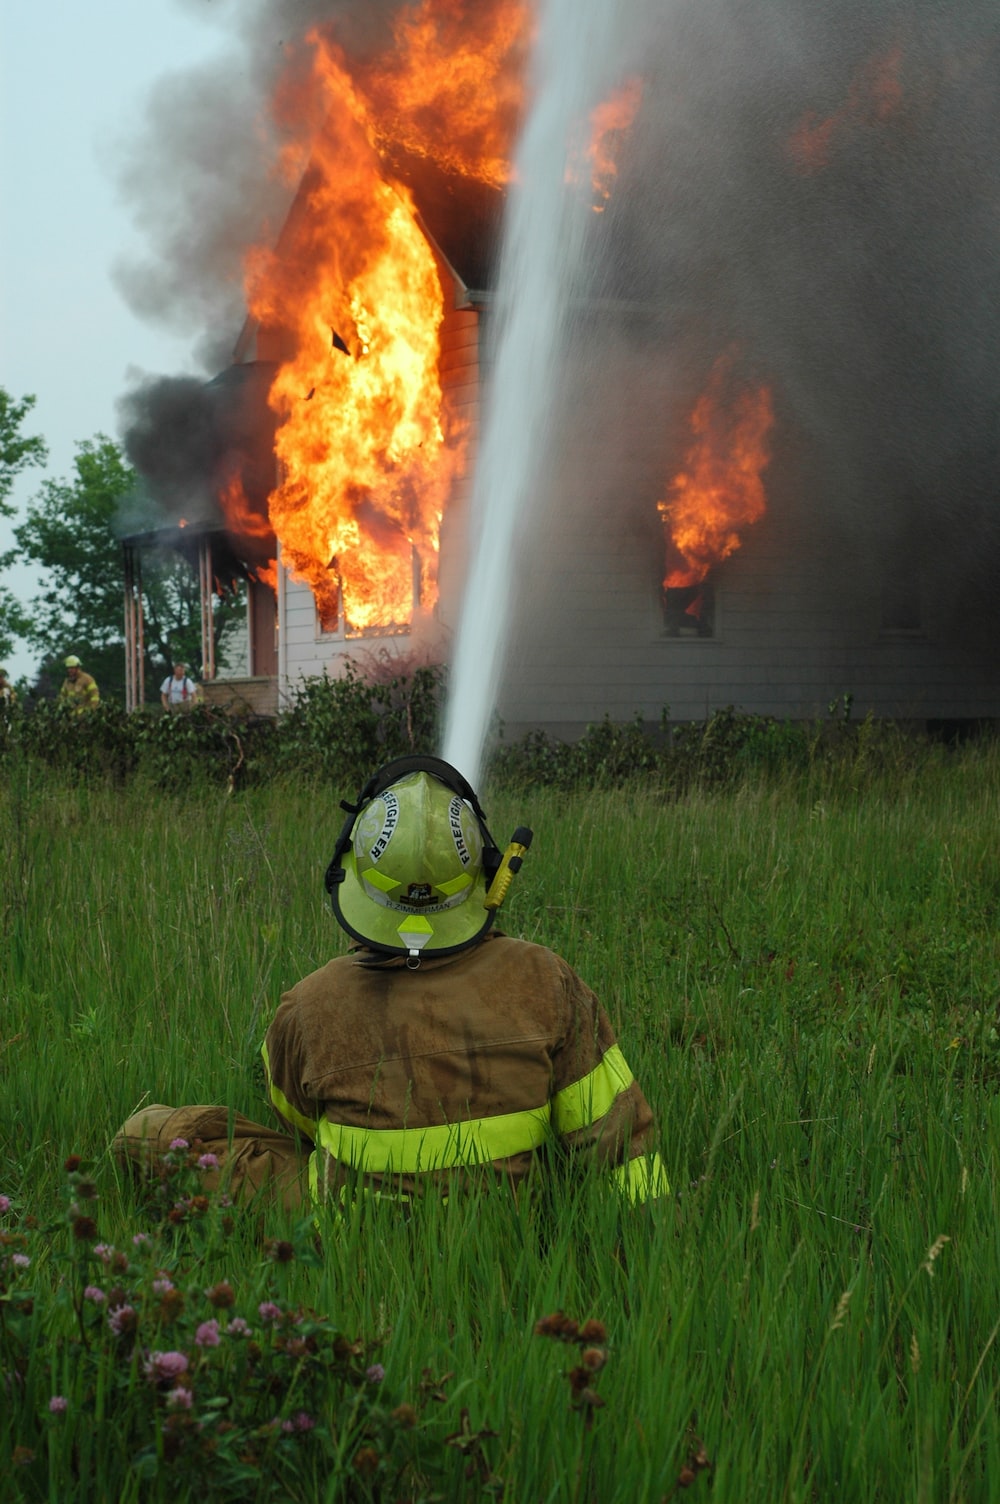 Will a fireproof safe survive a house fire?